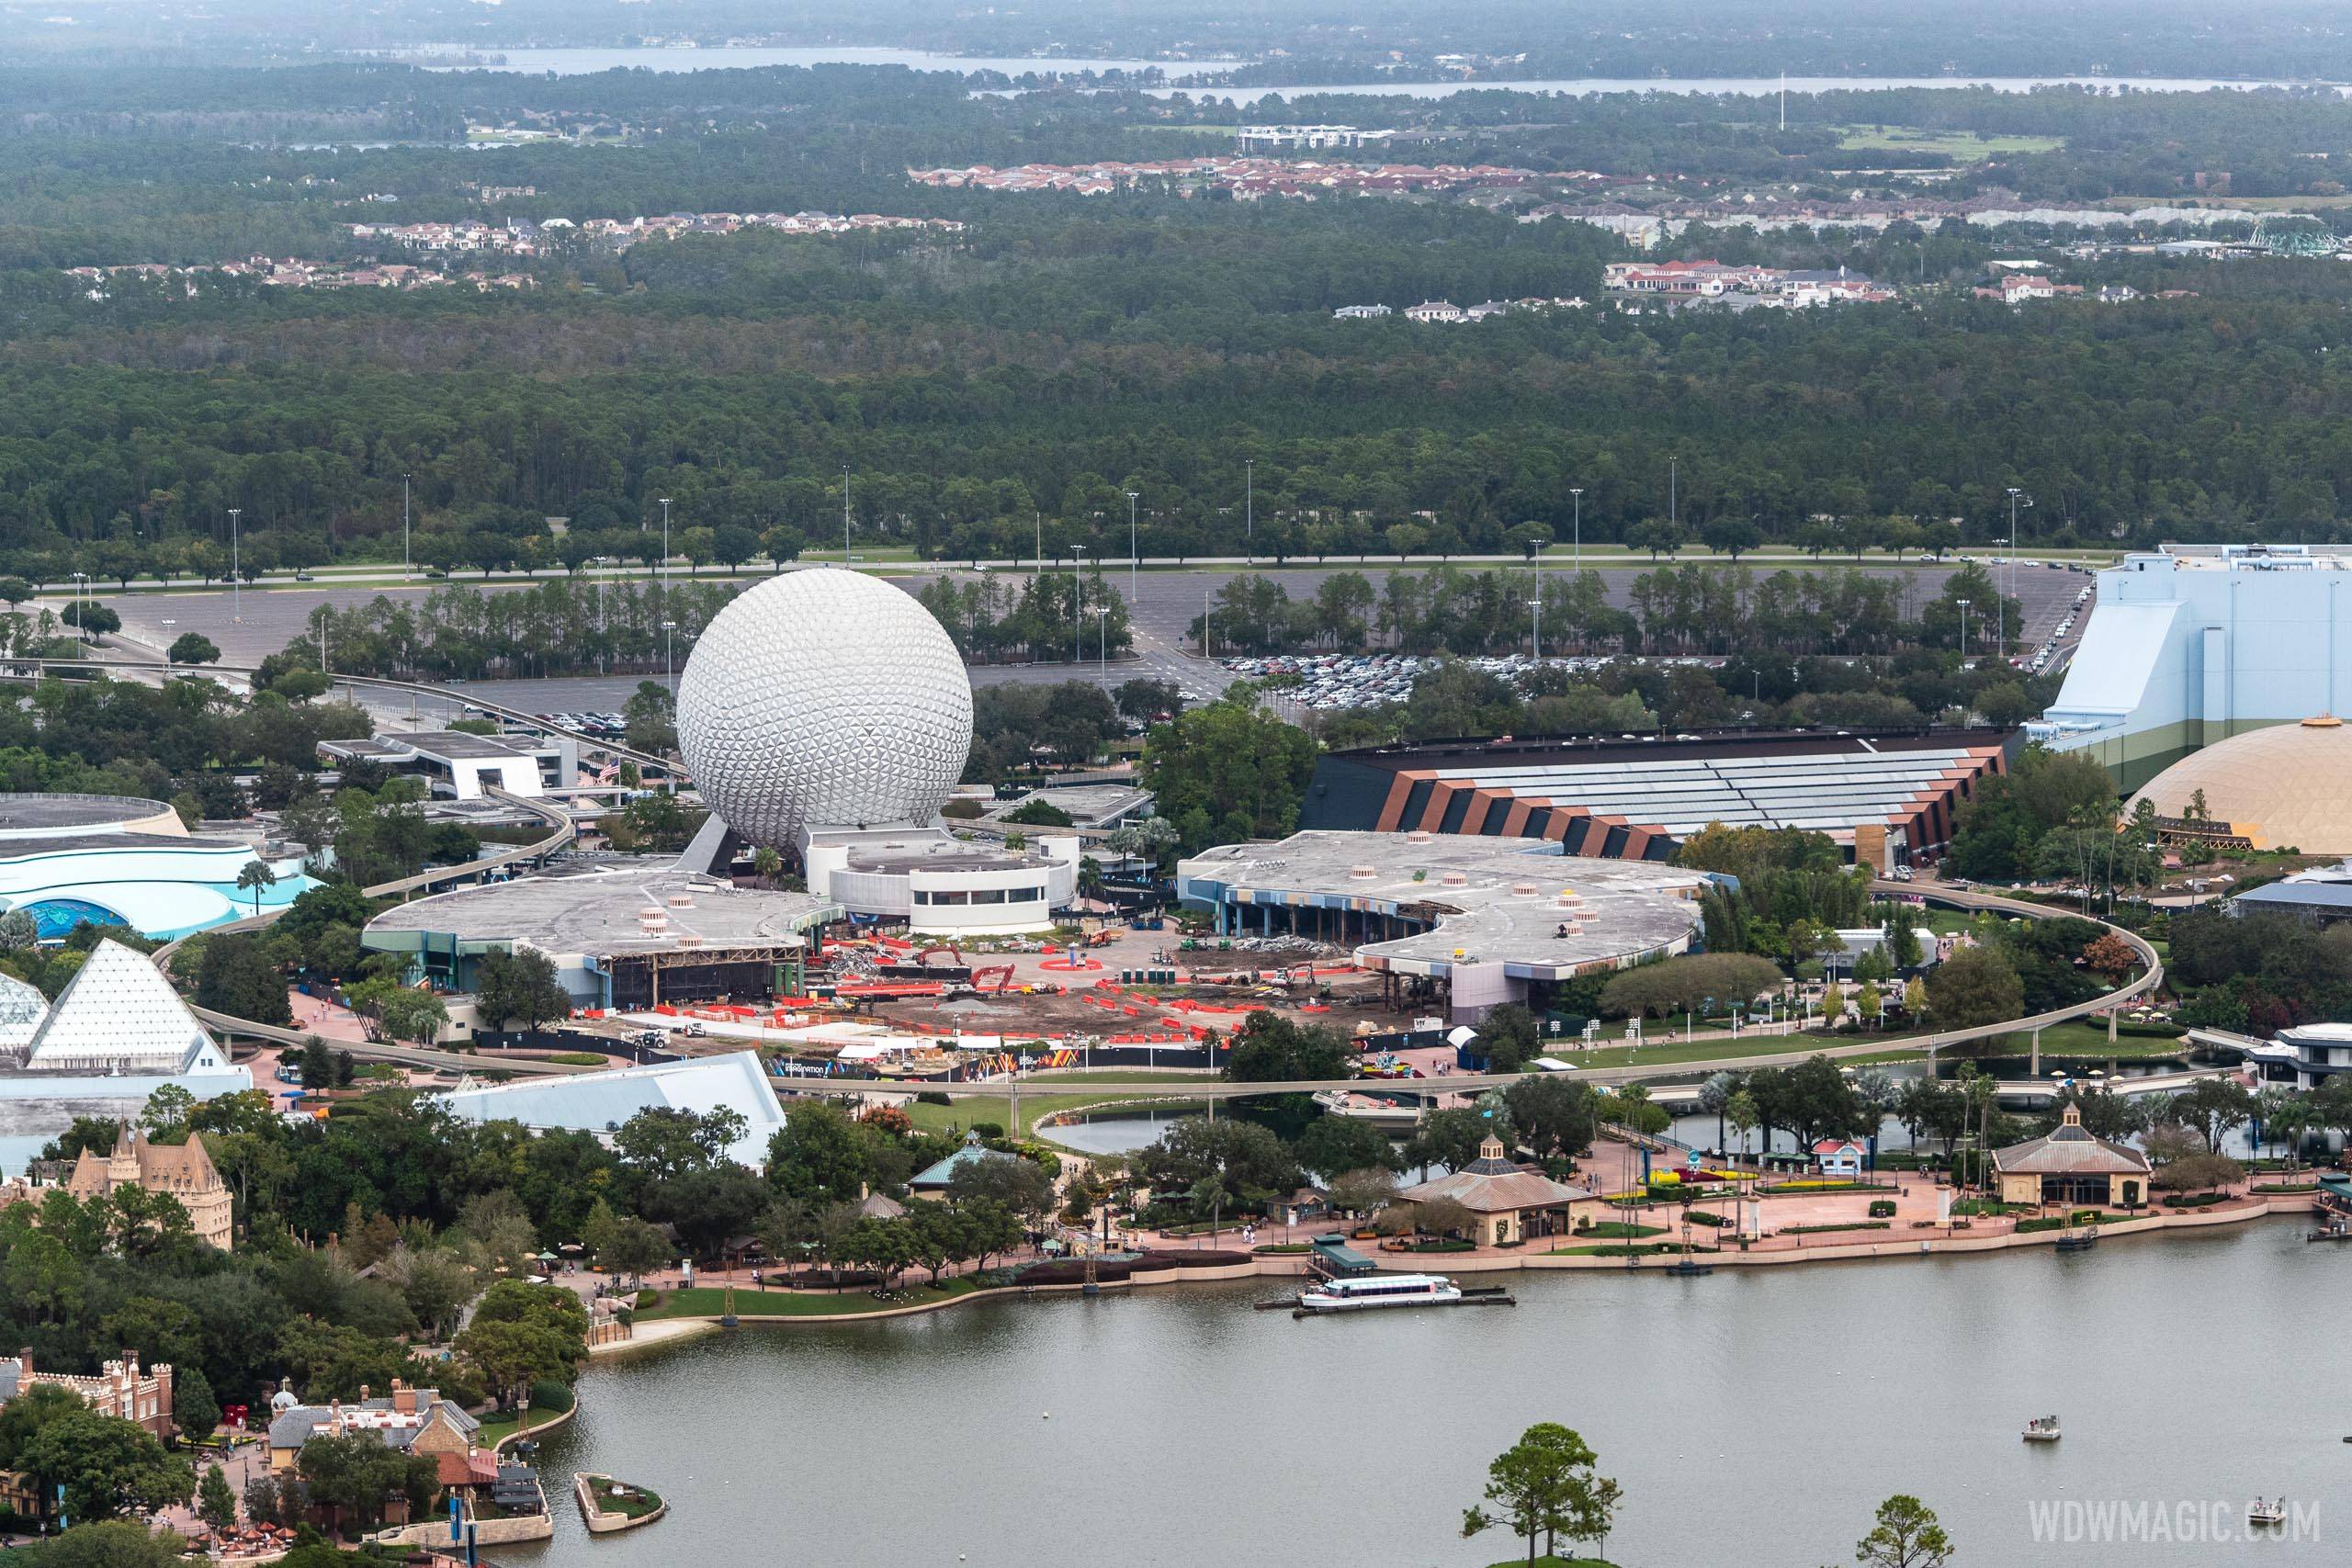 PHOTOS - Aerial views of the EPCOT central spine demolition